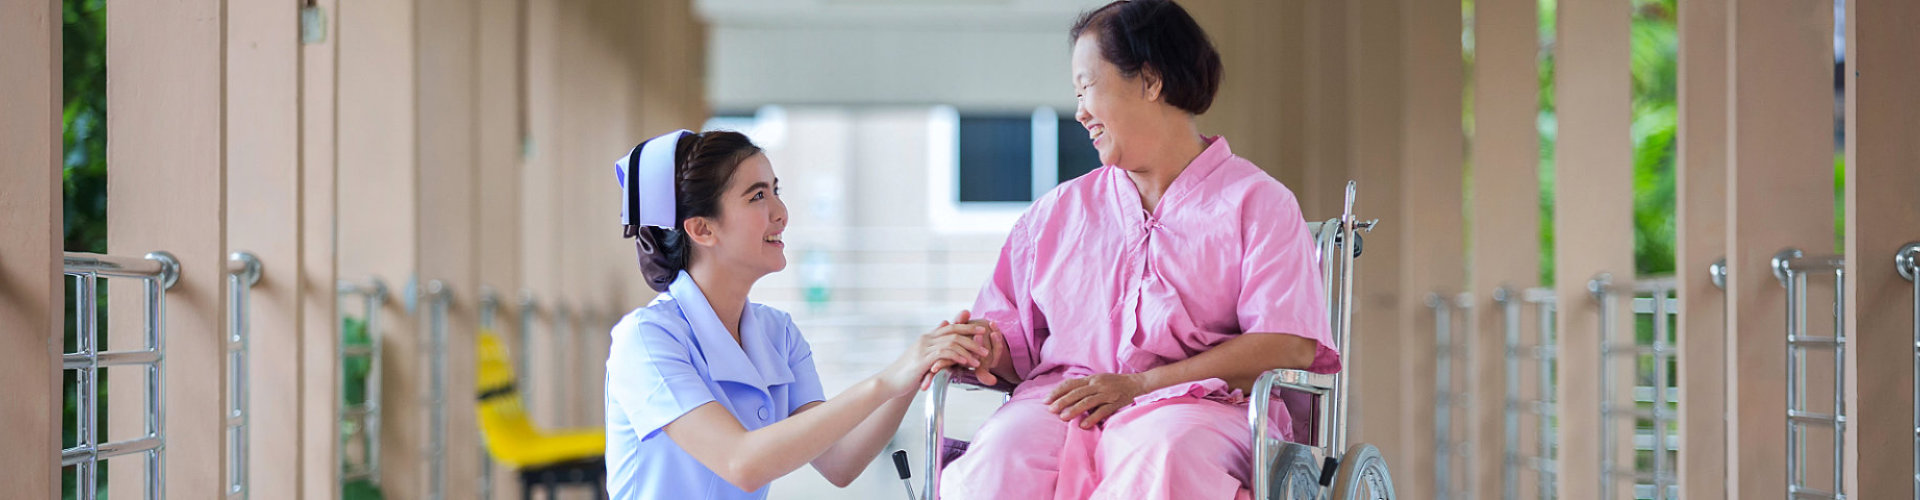 young nurse and old lady talking